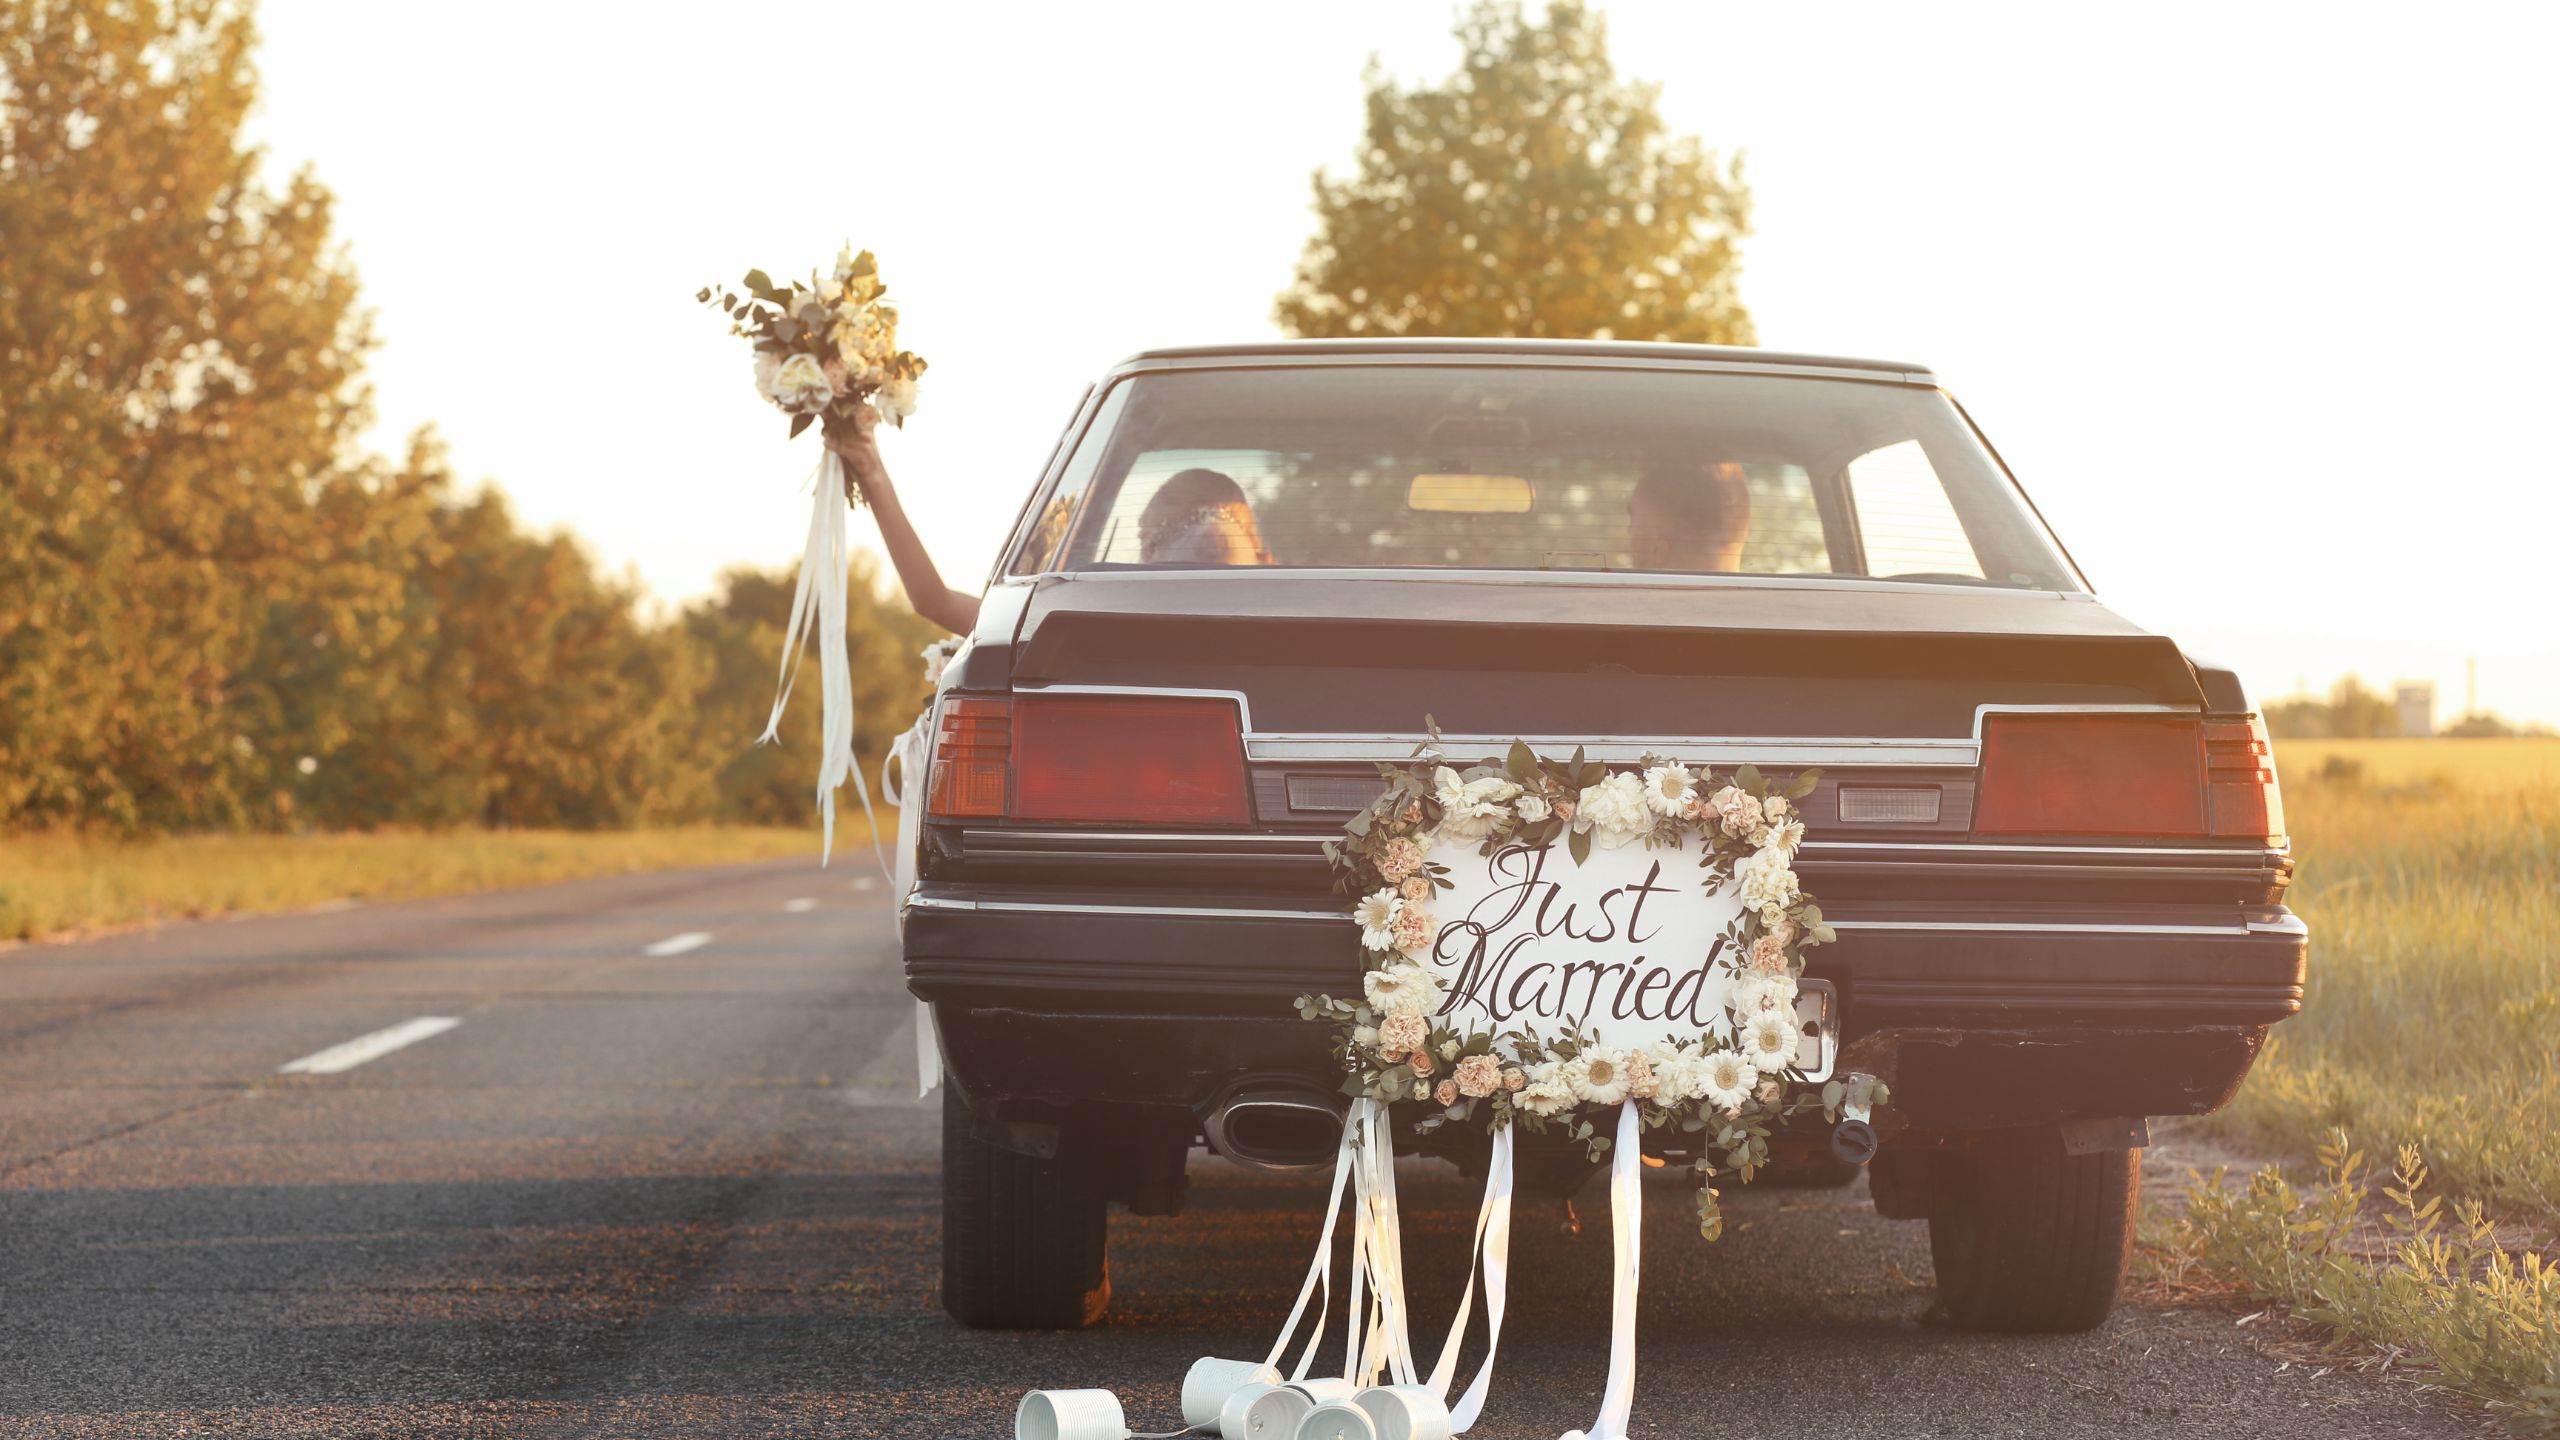 A dressed car with wedding ribbons containing couples who just got married